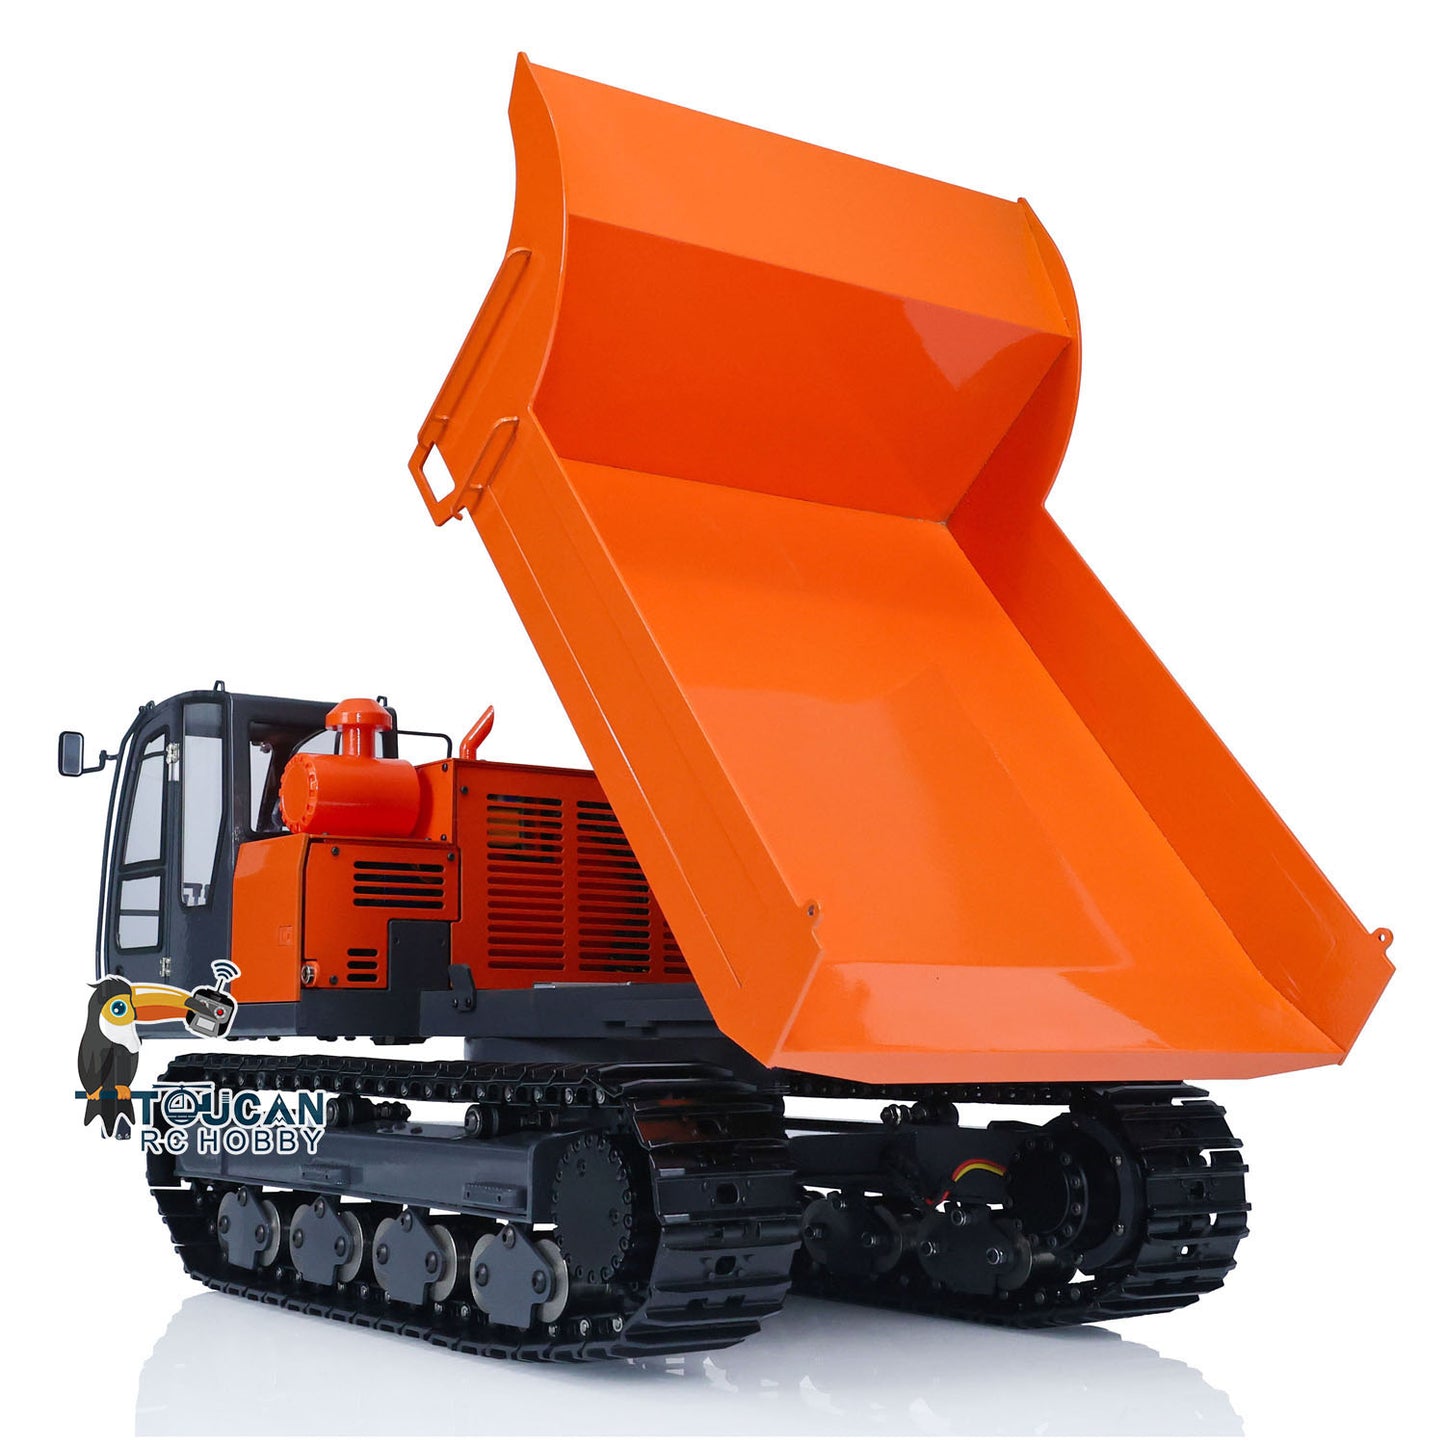 JZM Metal 1/12 EG110R RC Hydraulic Tracked Truck Painted and Assembled Vehicles FlySky I6S Radio Control Dumper Car Model